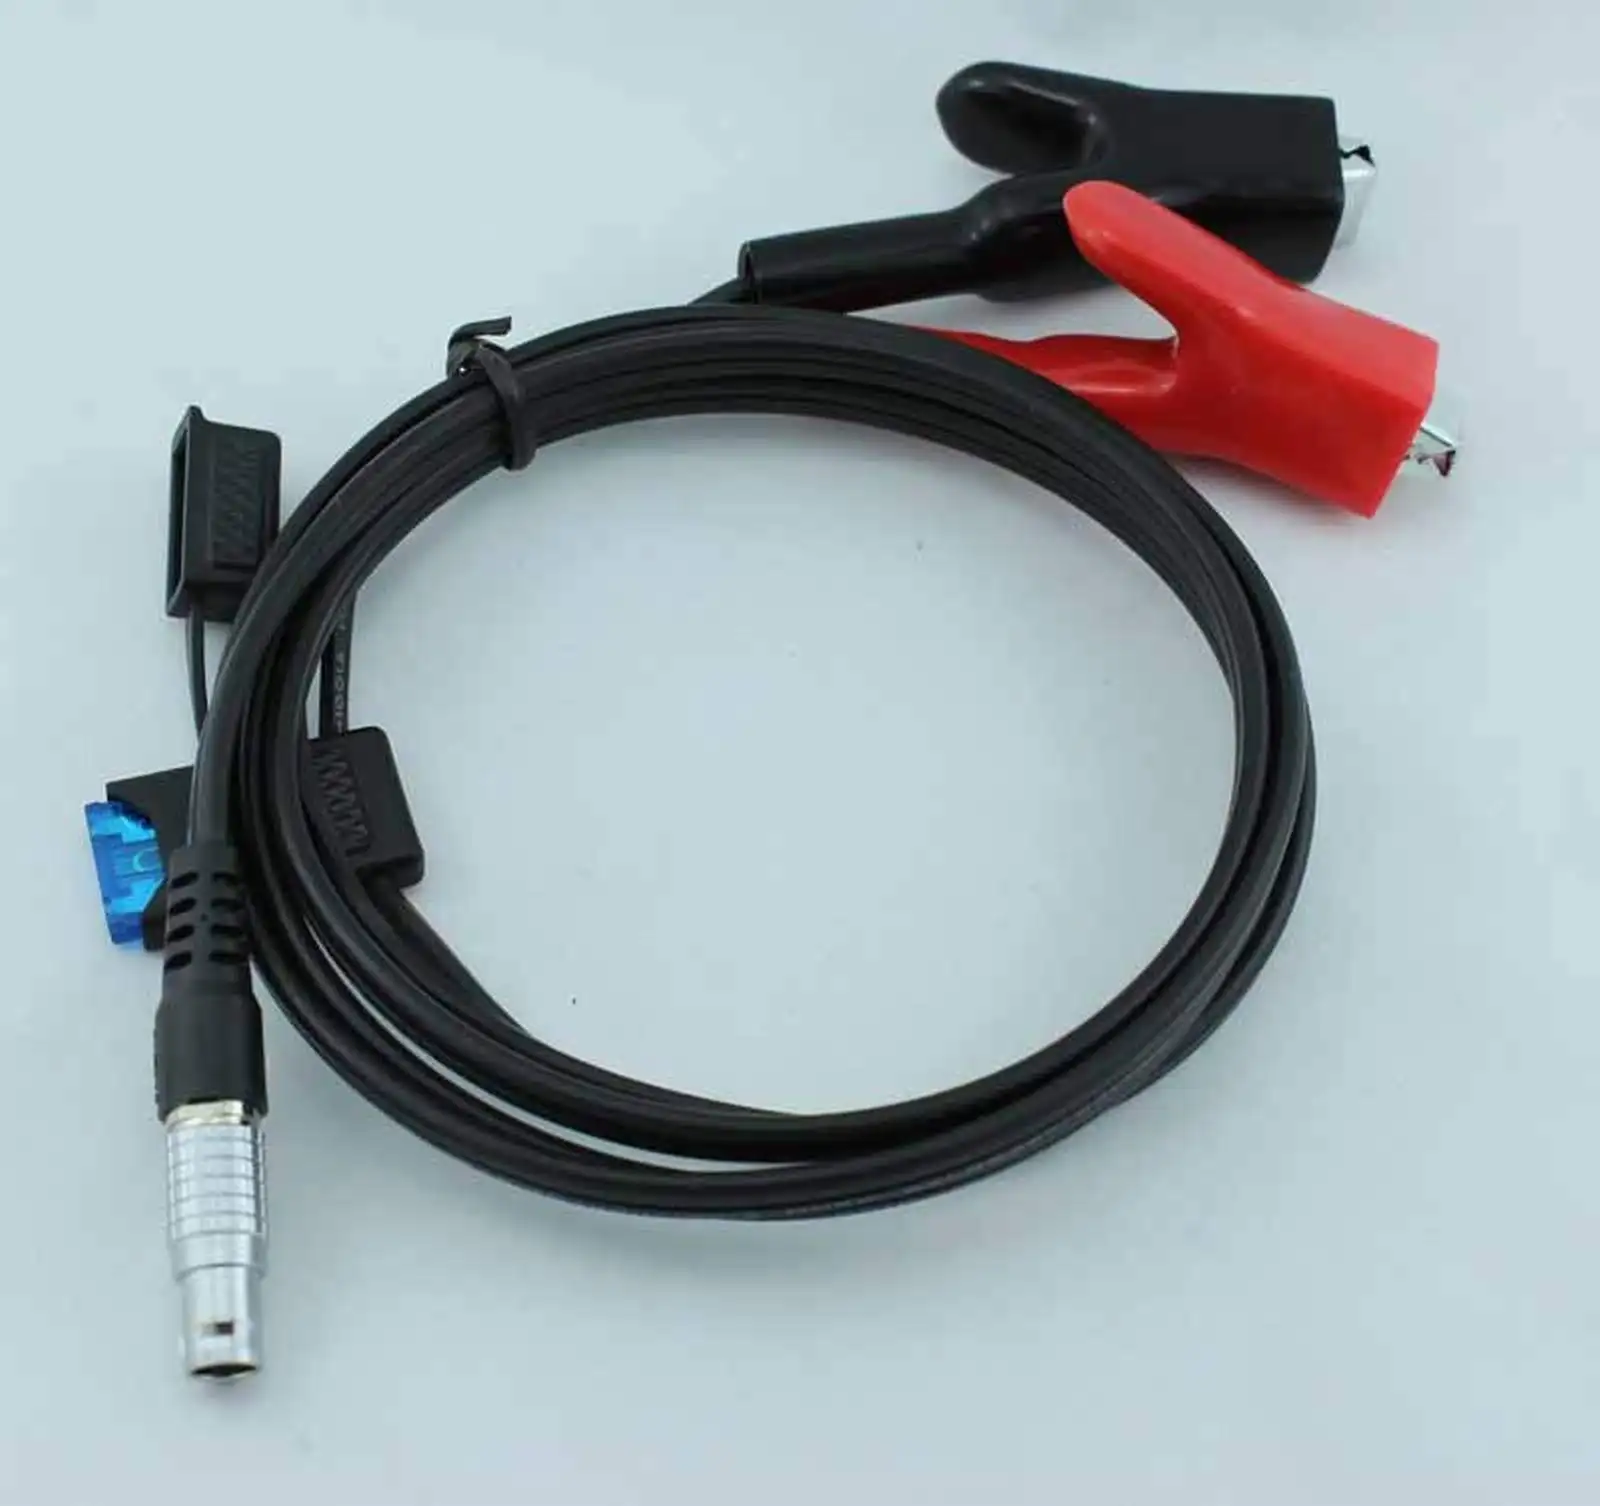 

BRAND NEW Power Cable for Leica total station 5-pin (0B) wire to Alligator clips